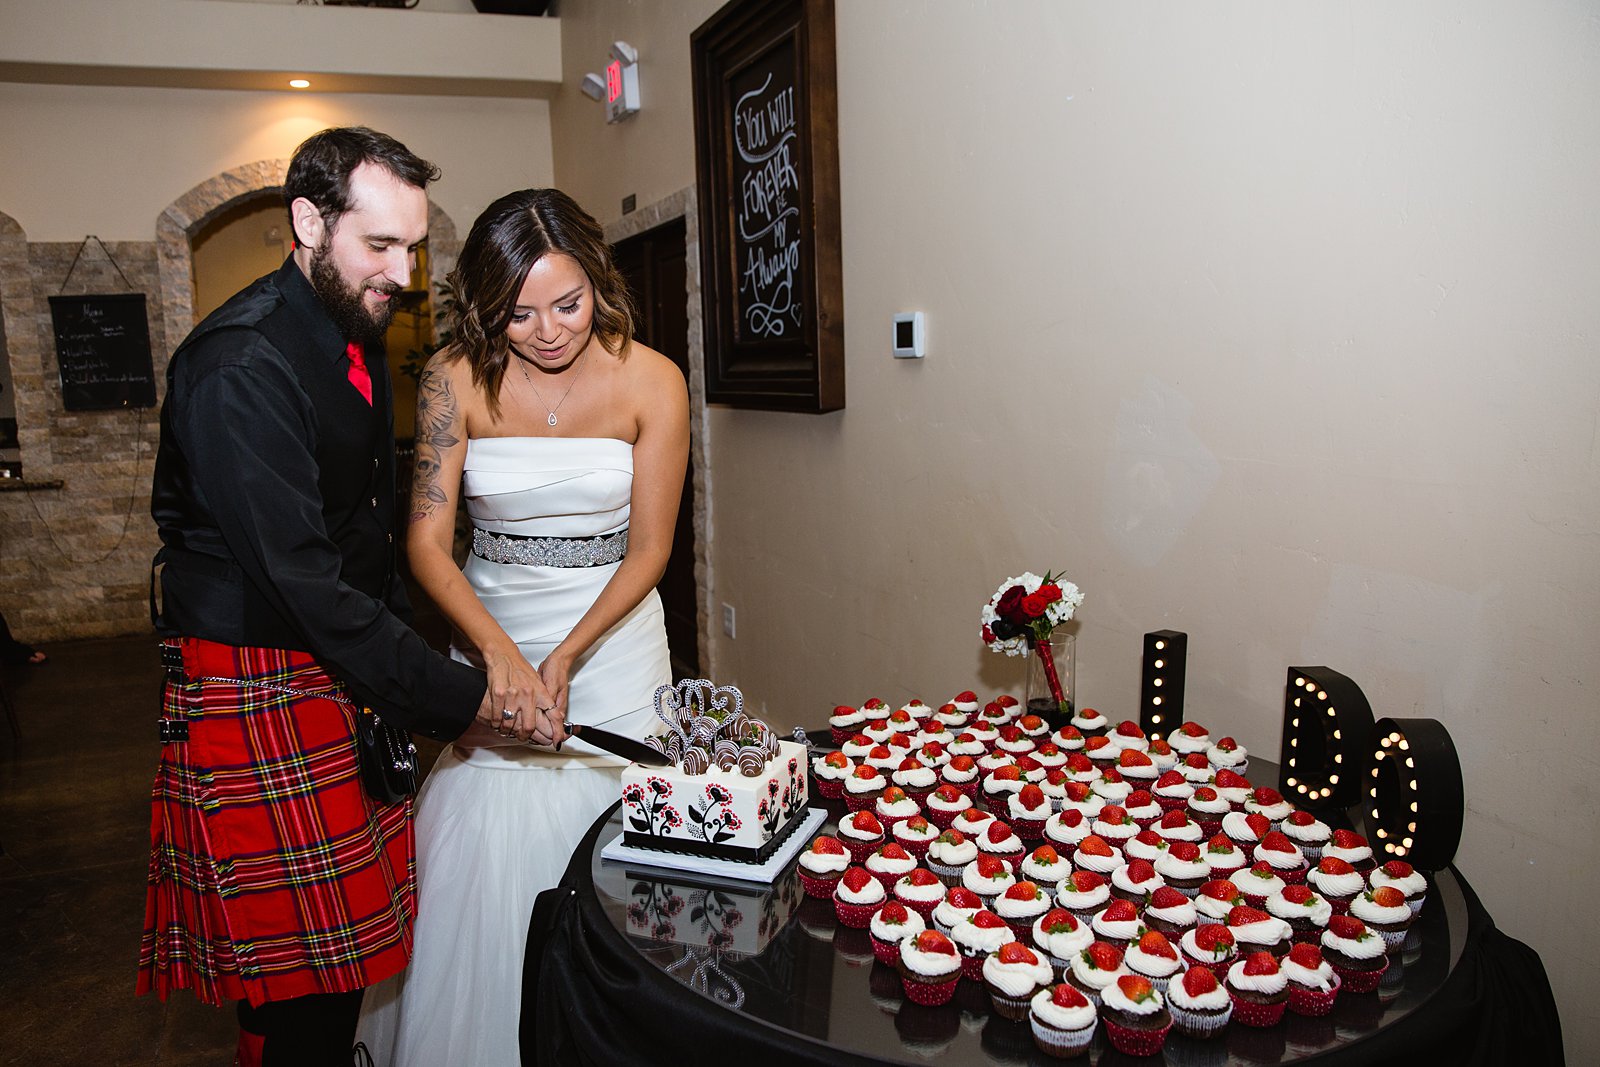 Bride and groom cutting the cake during their wedding reception at the Superstition Manor by PMA Photography.